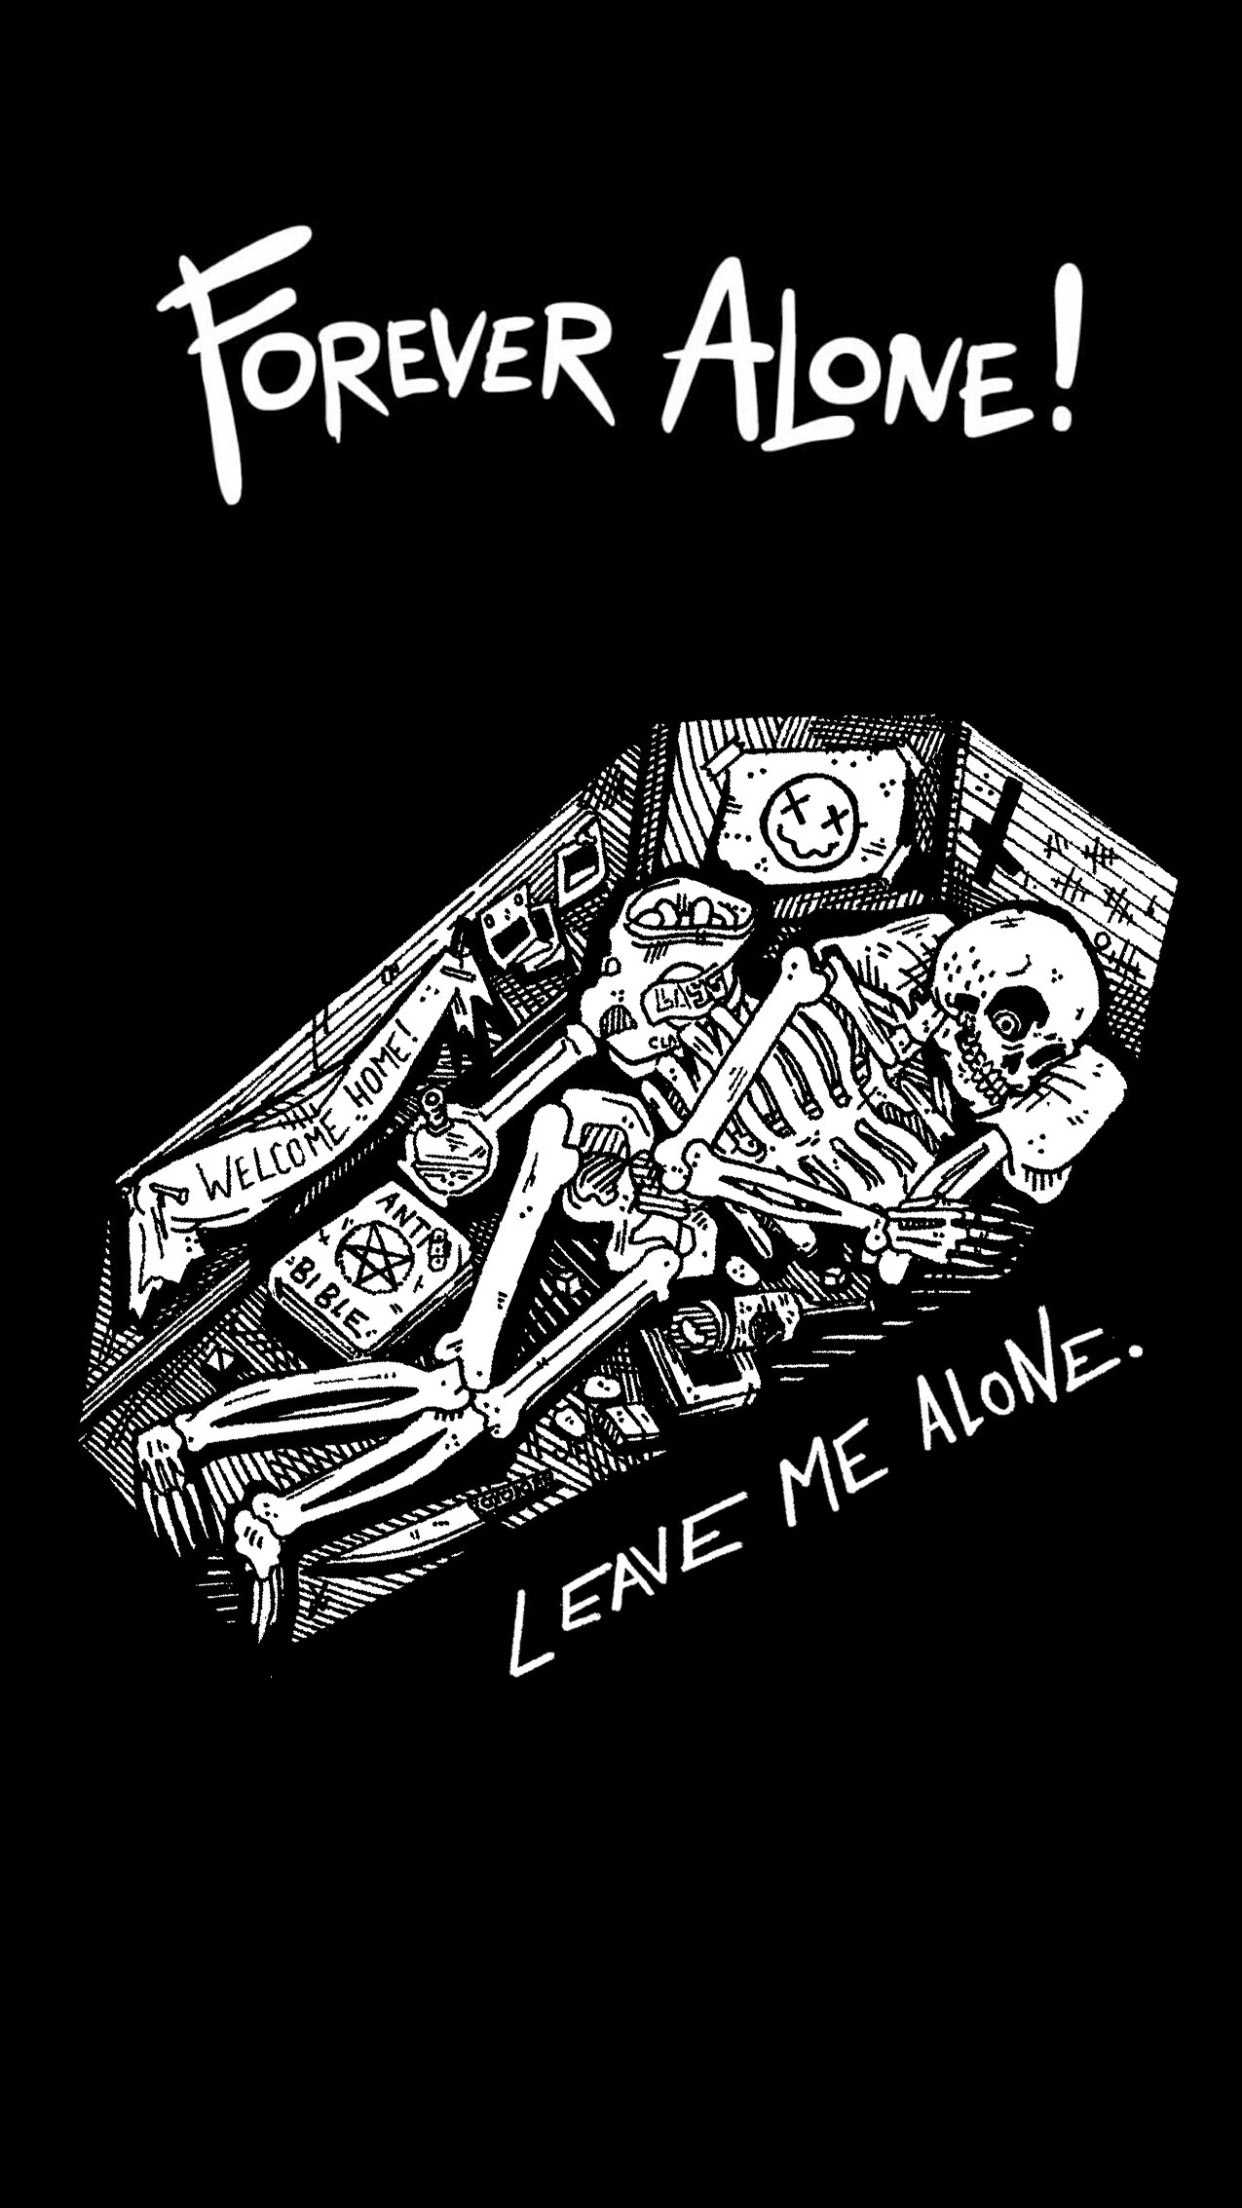 Leave Me Alone Wallpapers